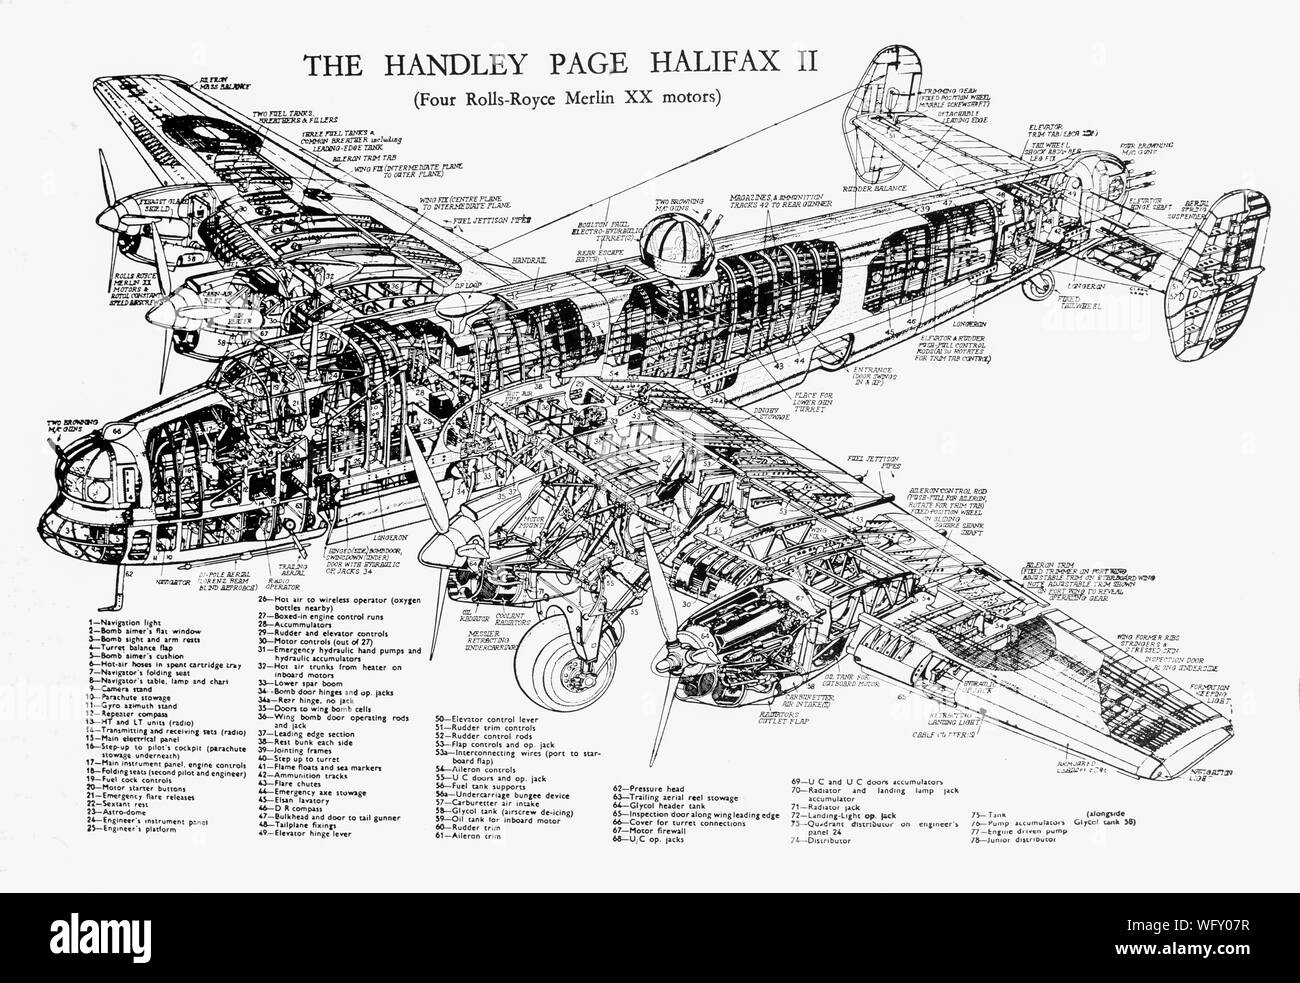 An exploded view of the Handley Page Halifax II, a Royal Air Force (RAF) four-engined heavy bomber of the Second World War.  Originally designed as a twin-engine bomber, the design was altered at the Ministry to a four-engine arrangement powered by the Rolls-Royce Merlin engine. Stock Photo